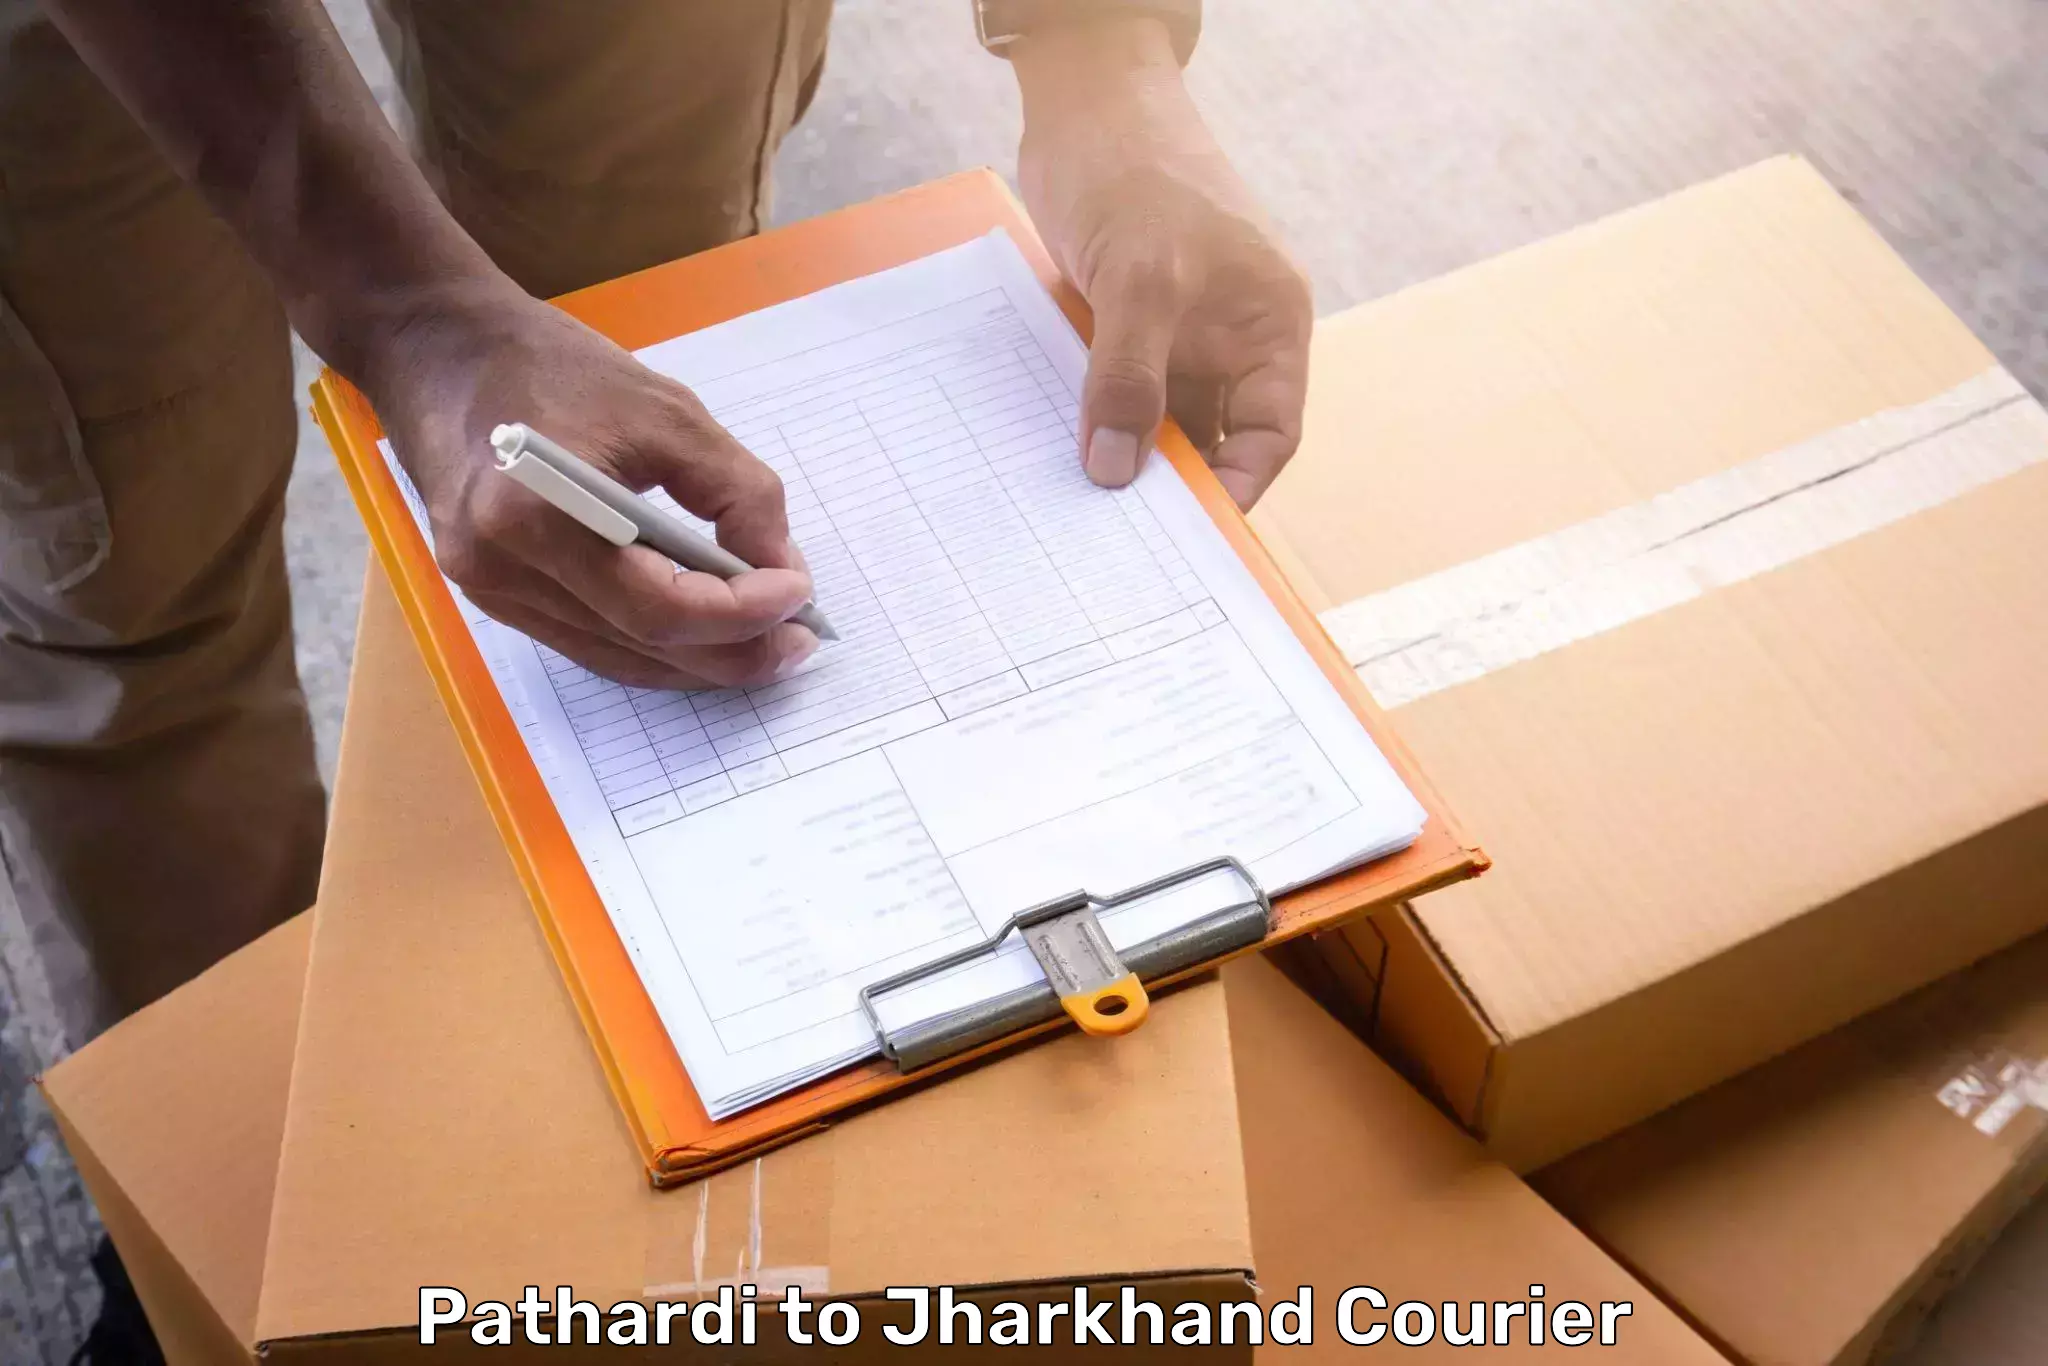 Baggage relocation service Pathardi to Jharkhand